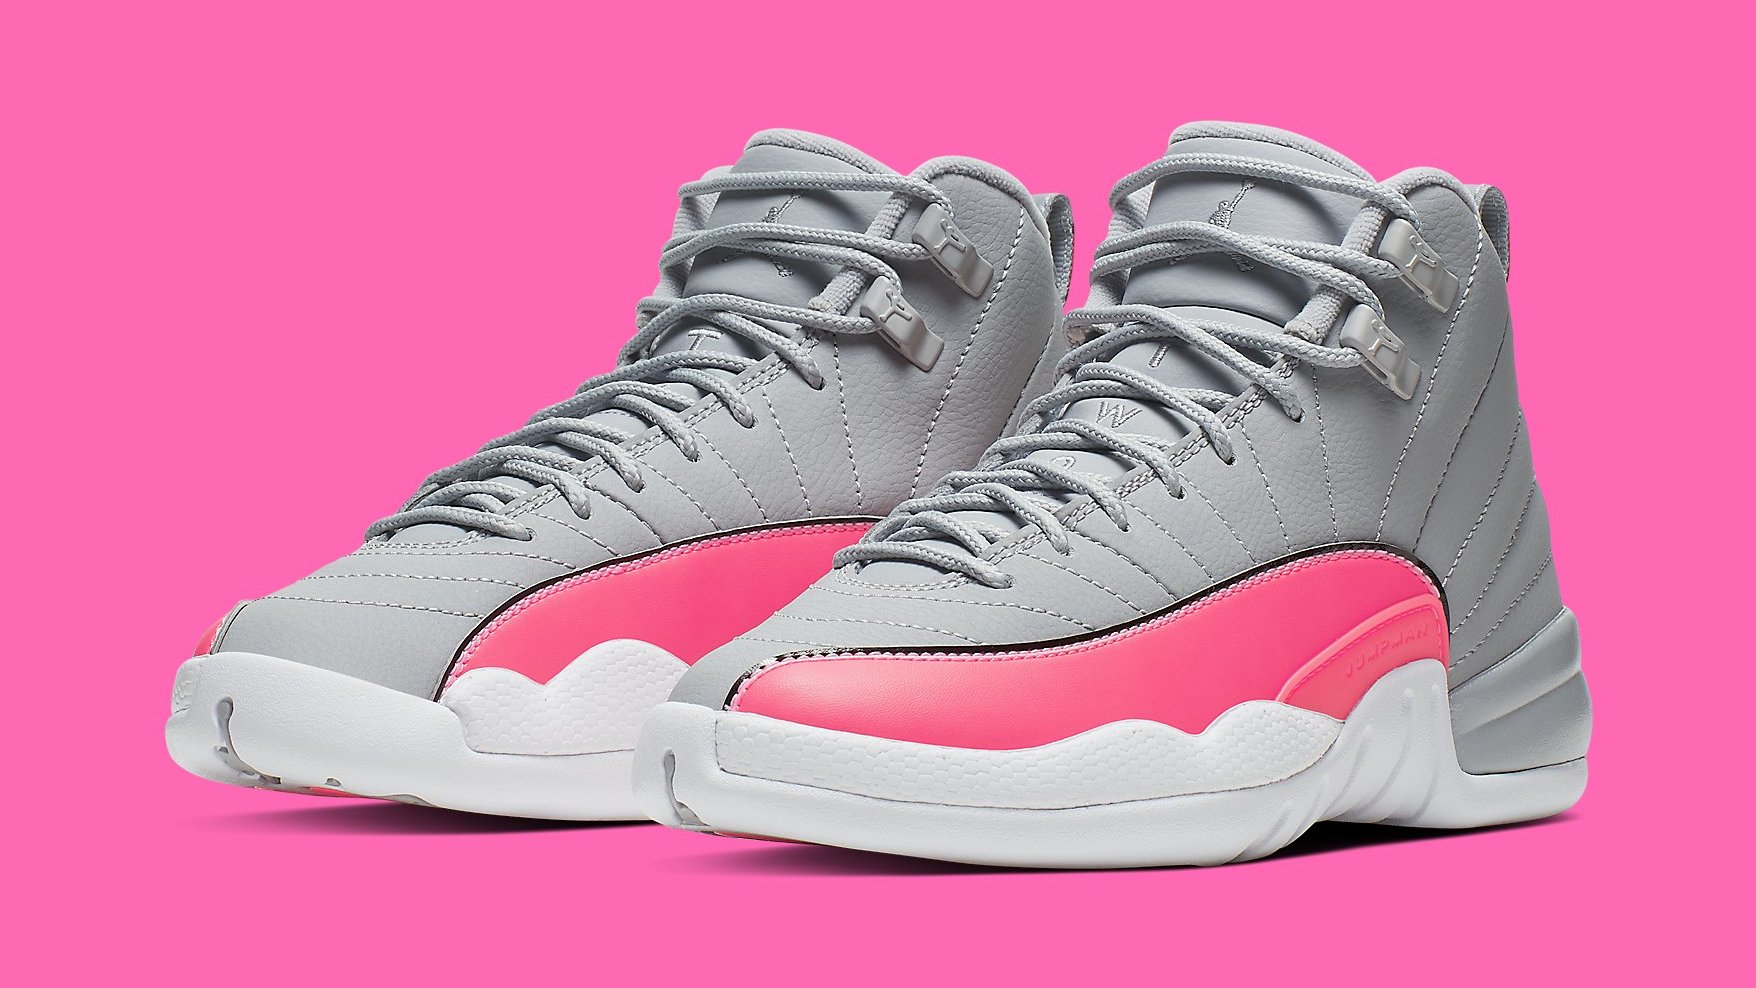 pink and gray 12s jordans